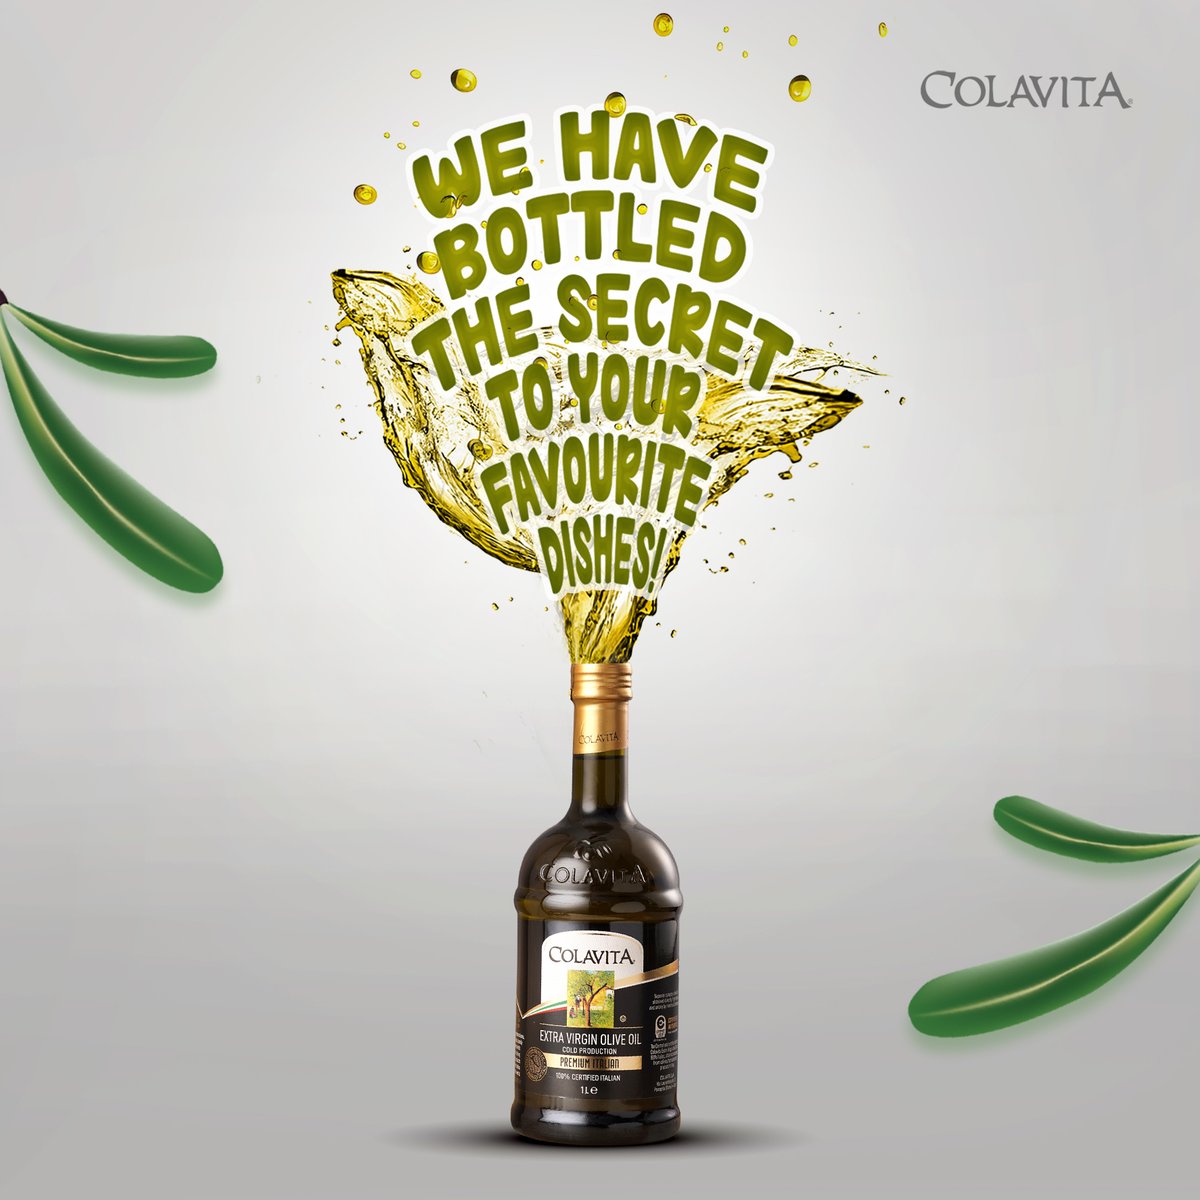 Elevate your culinary creations with Colavita EVOO – the secret ingredient to perfecting your favorite dishes.
#oliveoil #food #extravirginoliveoil #olive #evoo #healthyfood #organic #olives #garlic #instafood #homemade  #italianfood #oil #olioextraverginedioliva